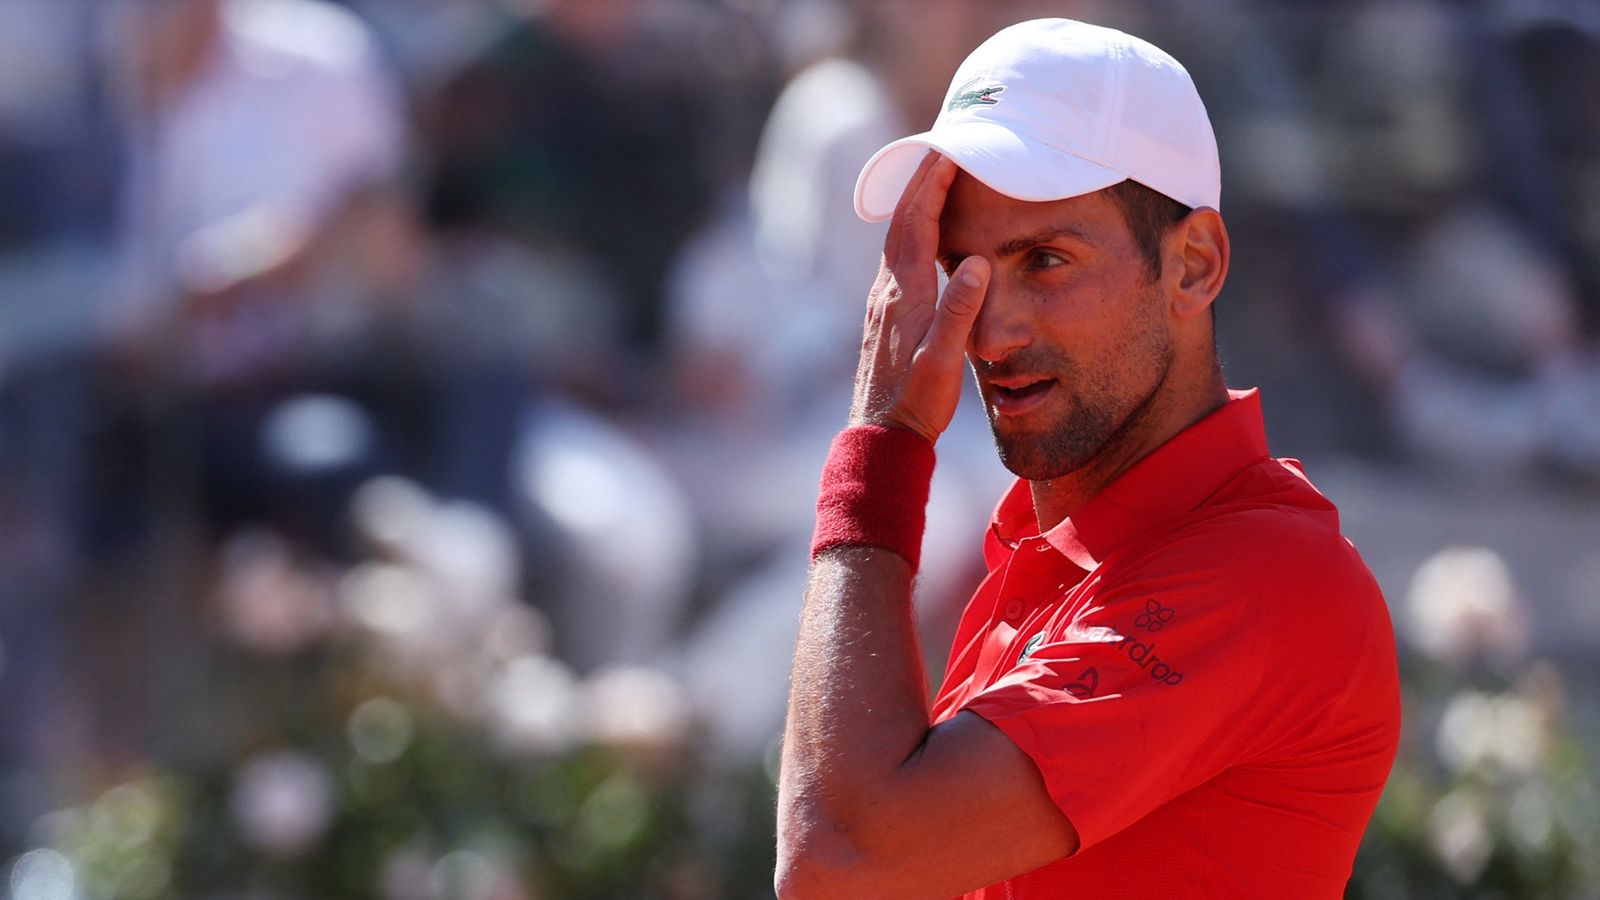 Novak Djokovic during his third round loss at the Italian Open. Pic: Reuters